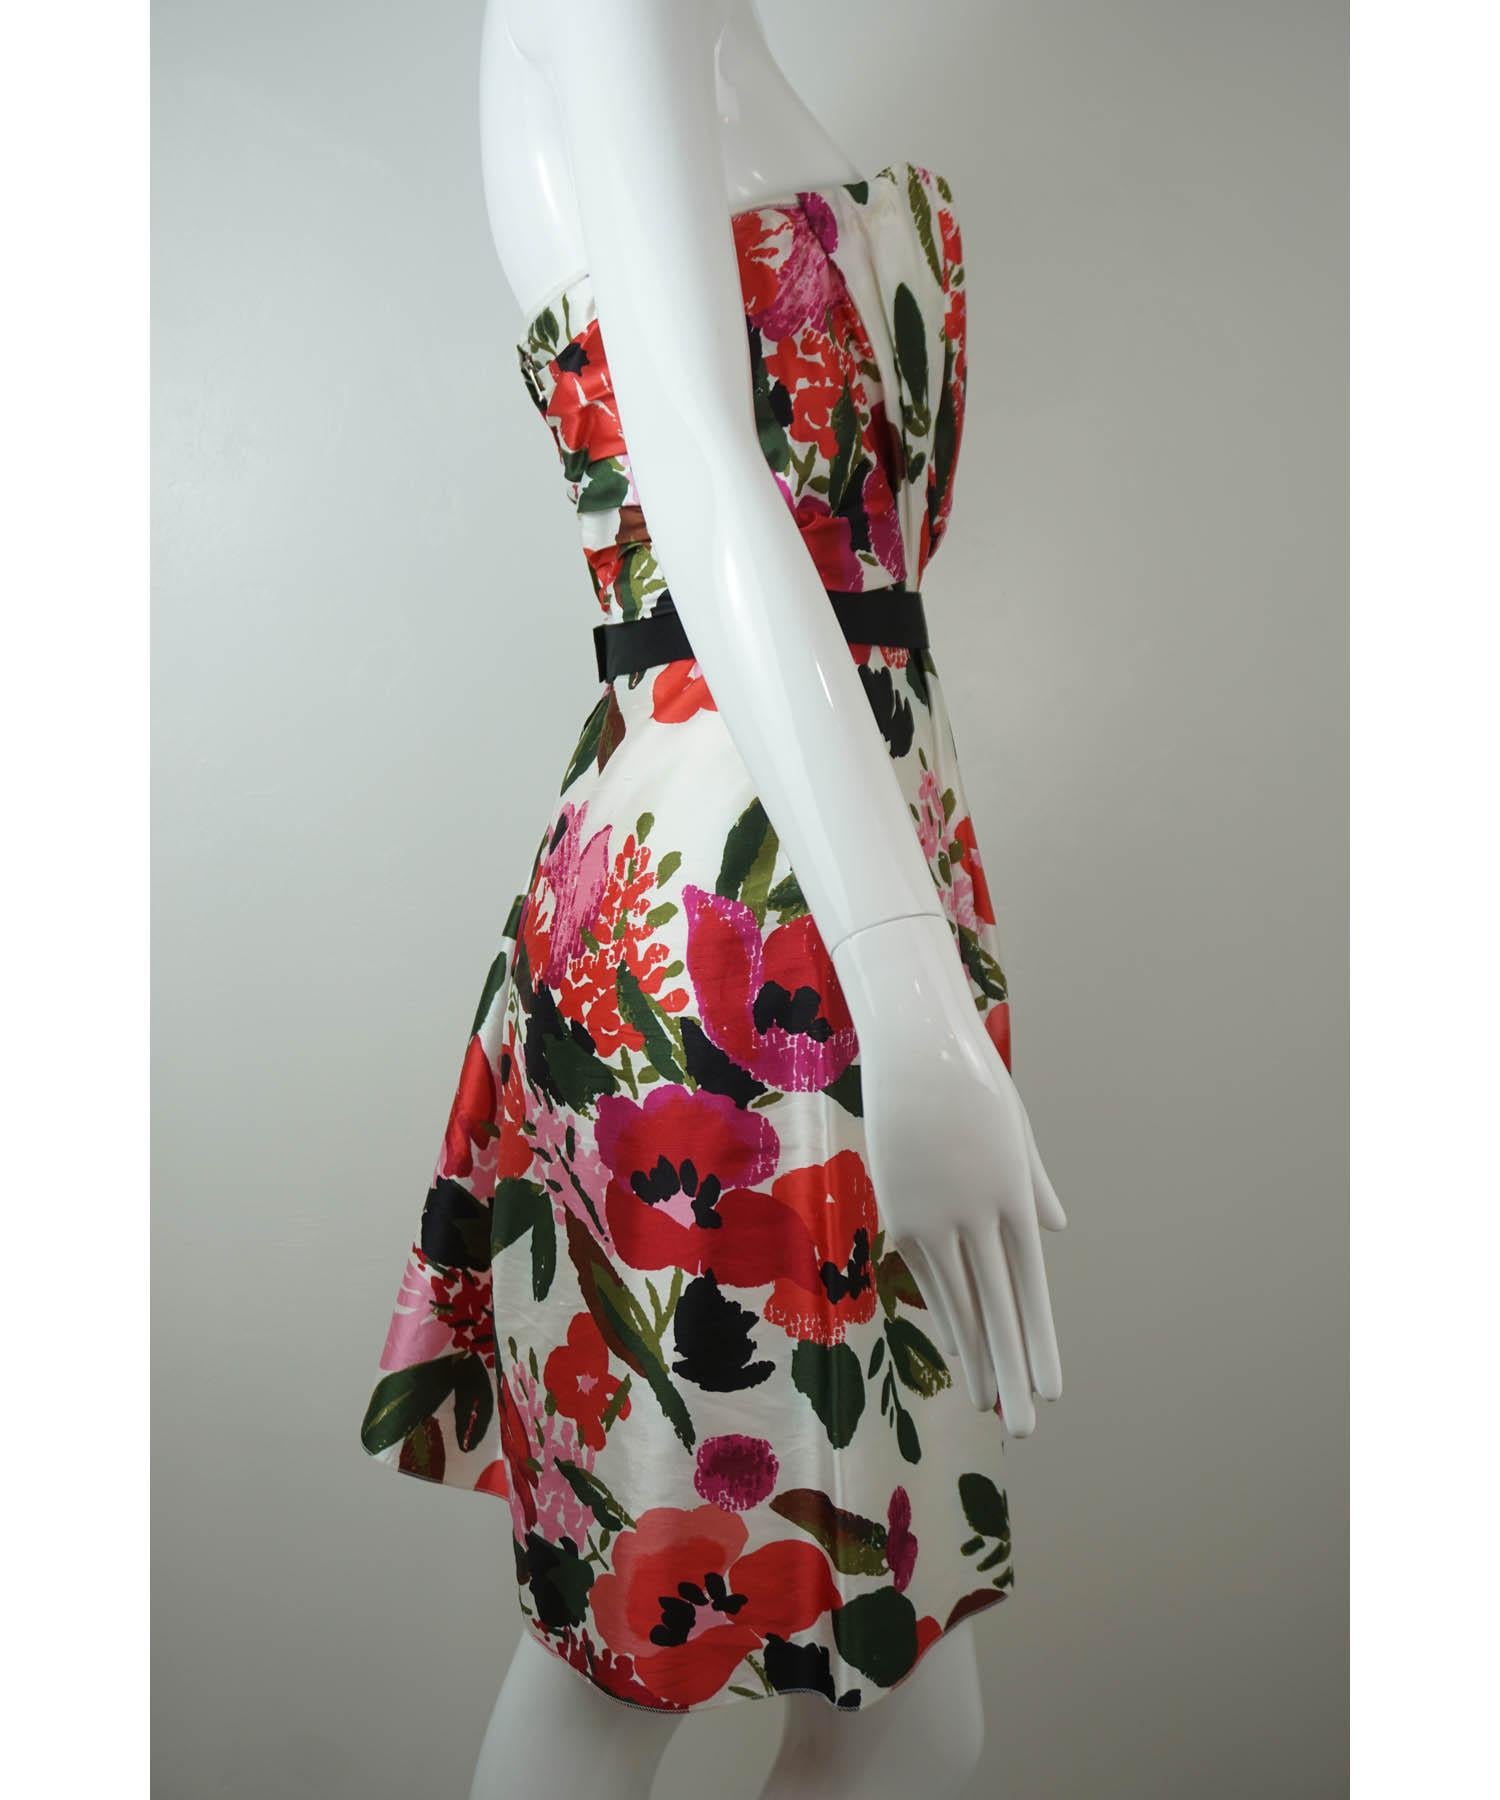 Dolce & Gabbana Silk Floral Print Dress In Excellent Condition For Sale In Carmel, CA